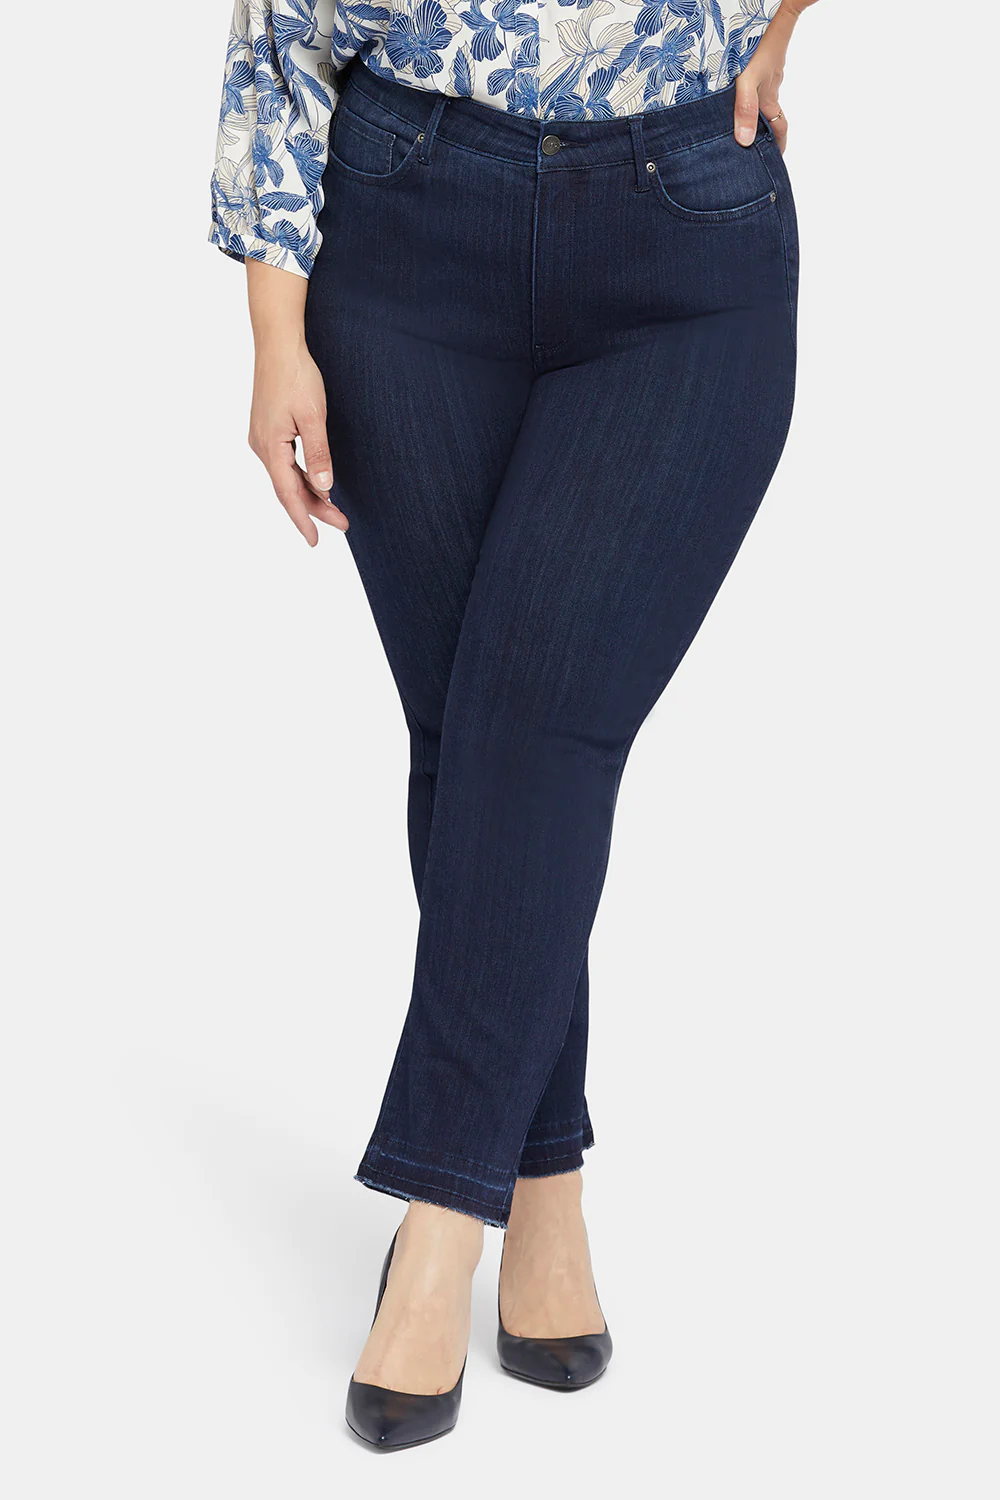 Plus Size Jeans for Your Shape